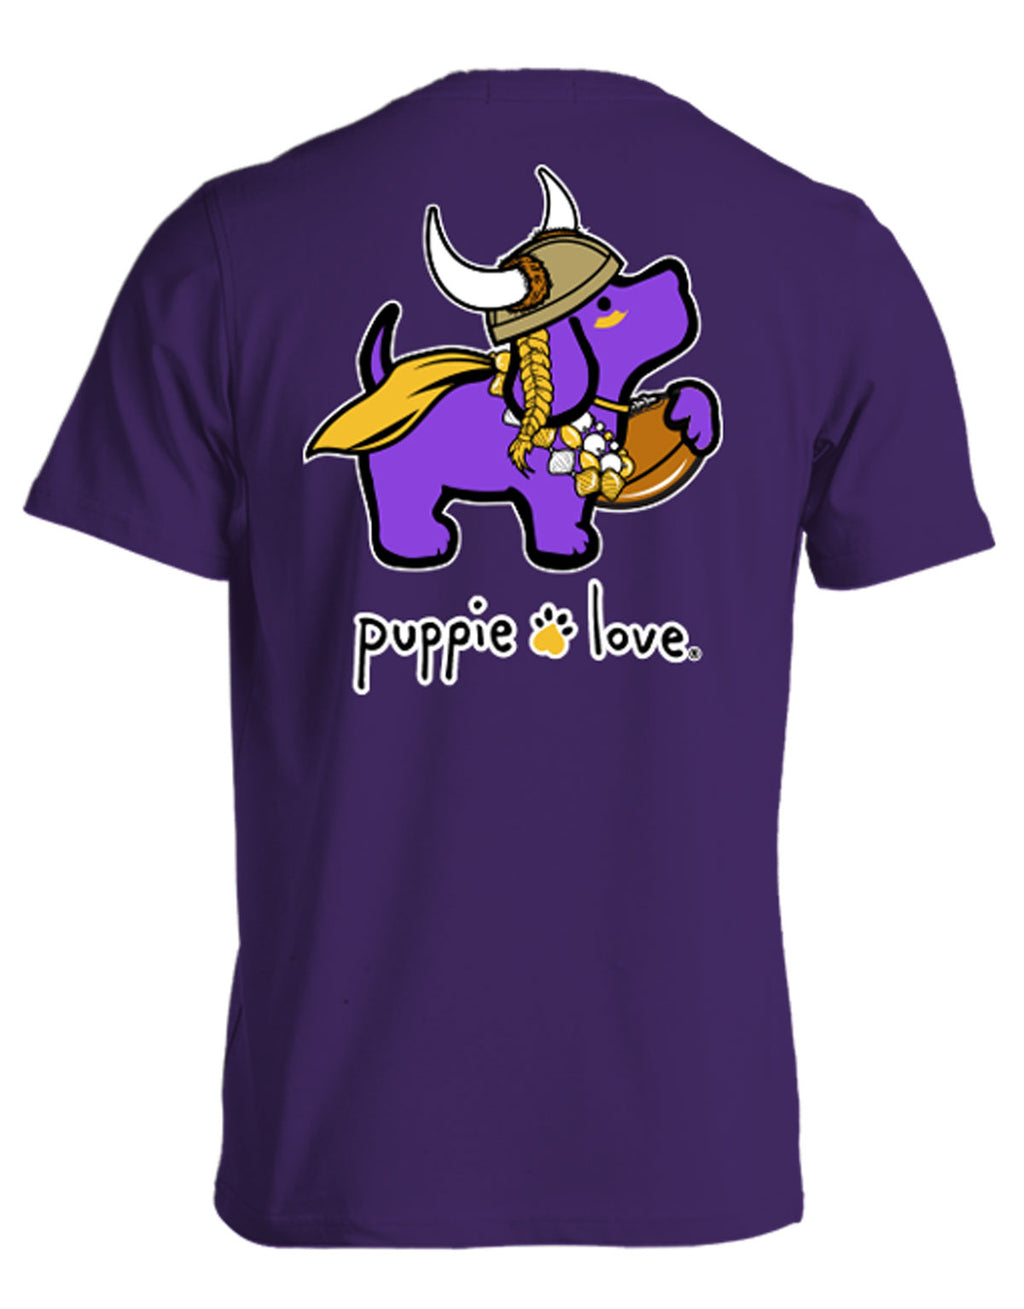 PURPLE AND GOLD MASCOT PUP - Puppie Love